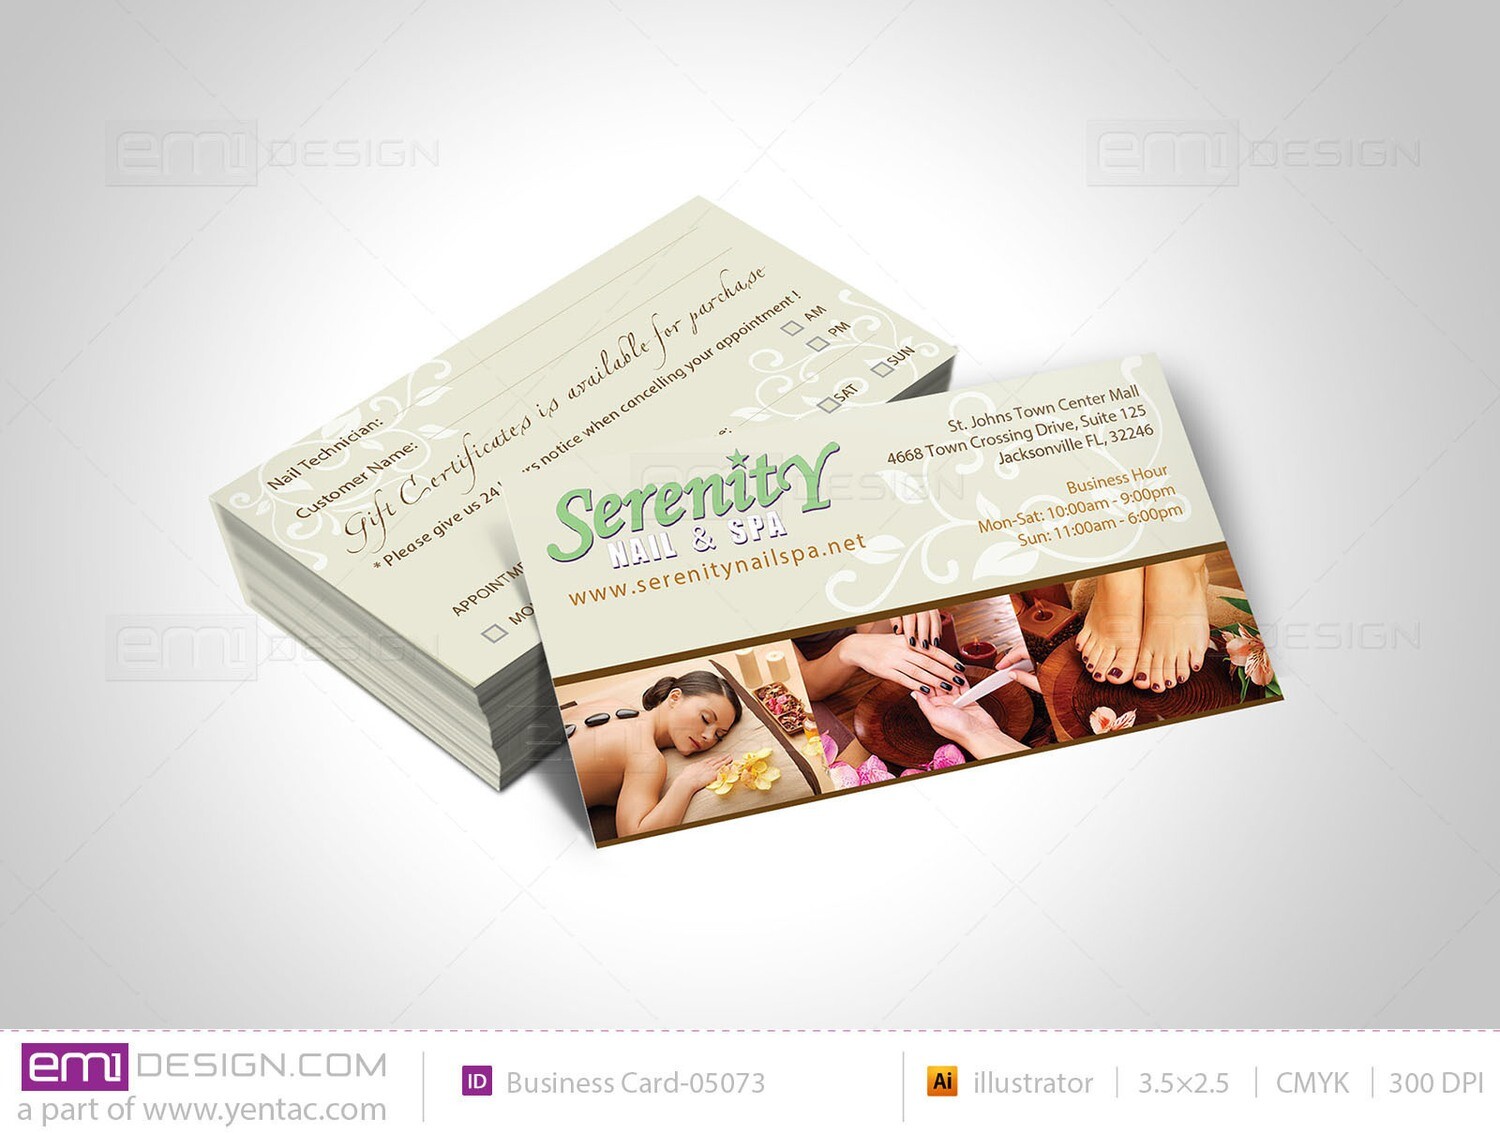 Business Card - Template buscard-05073